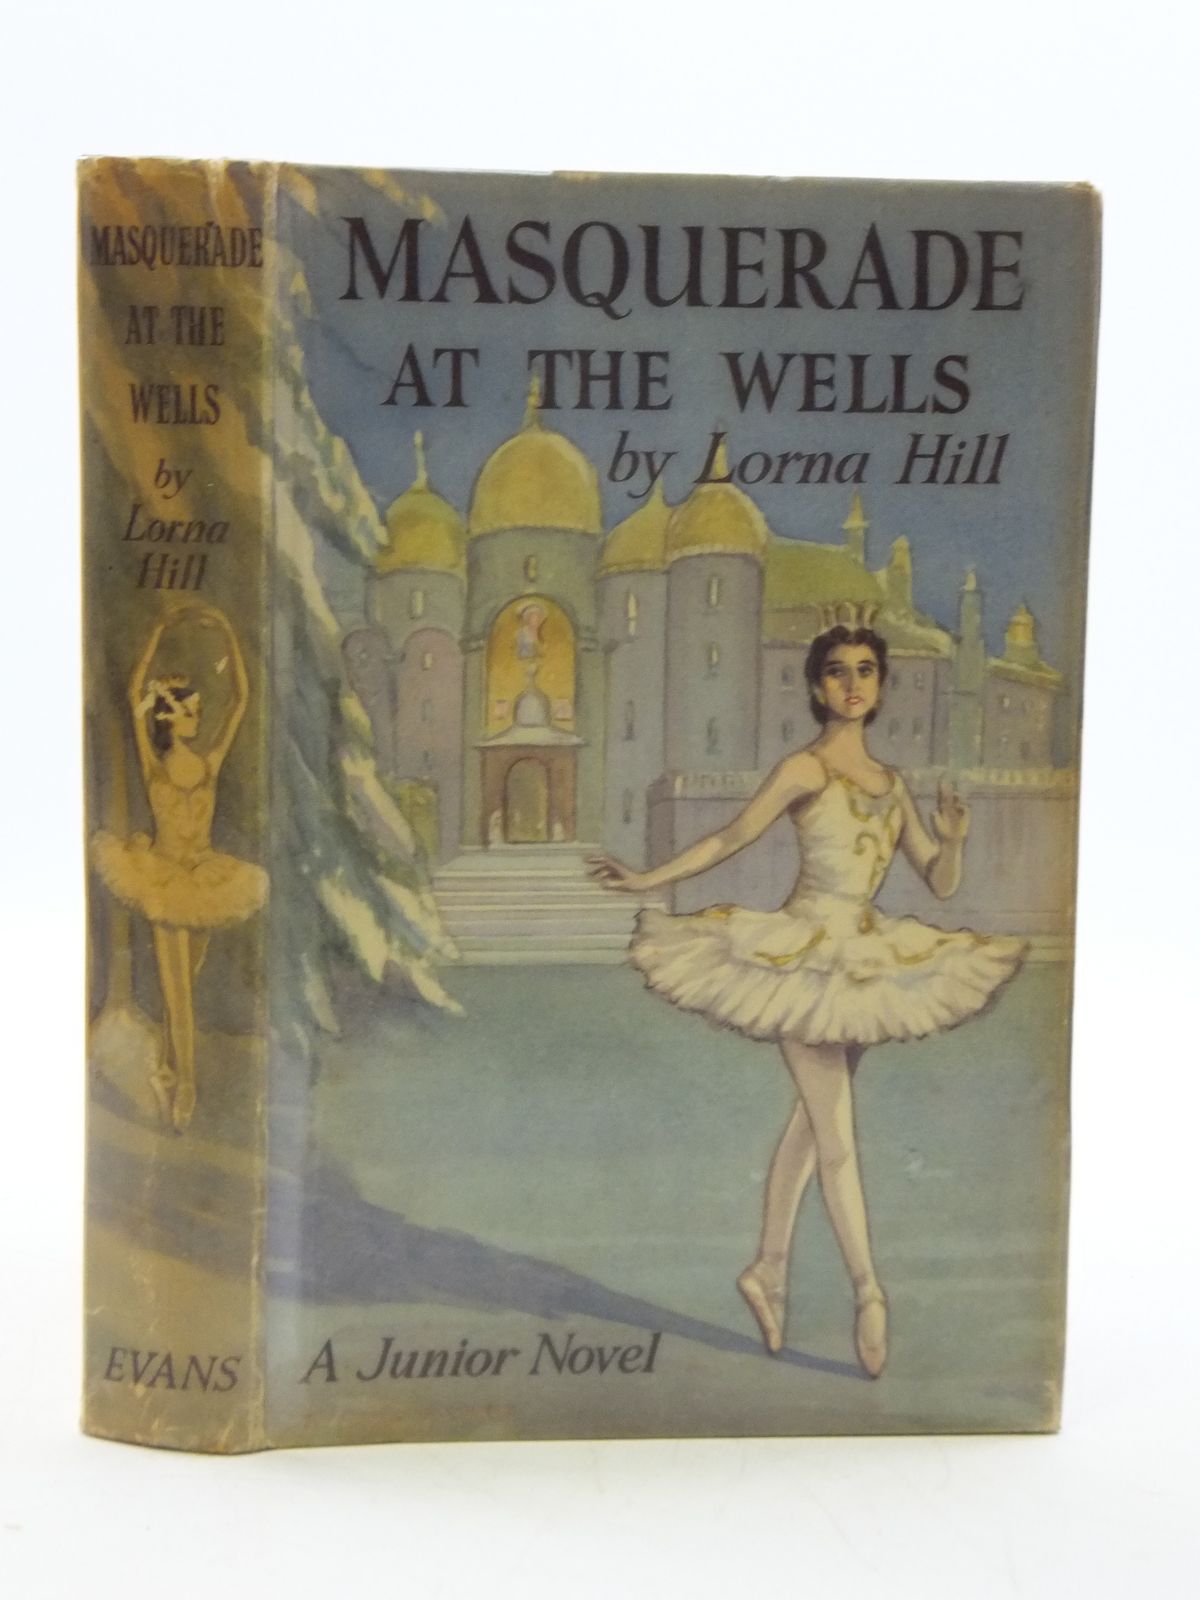 Cover of MASQUERADE AT THE WELLS by Lorna Hill